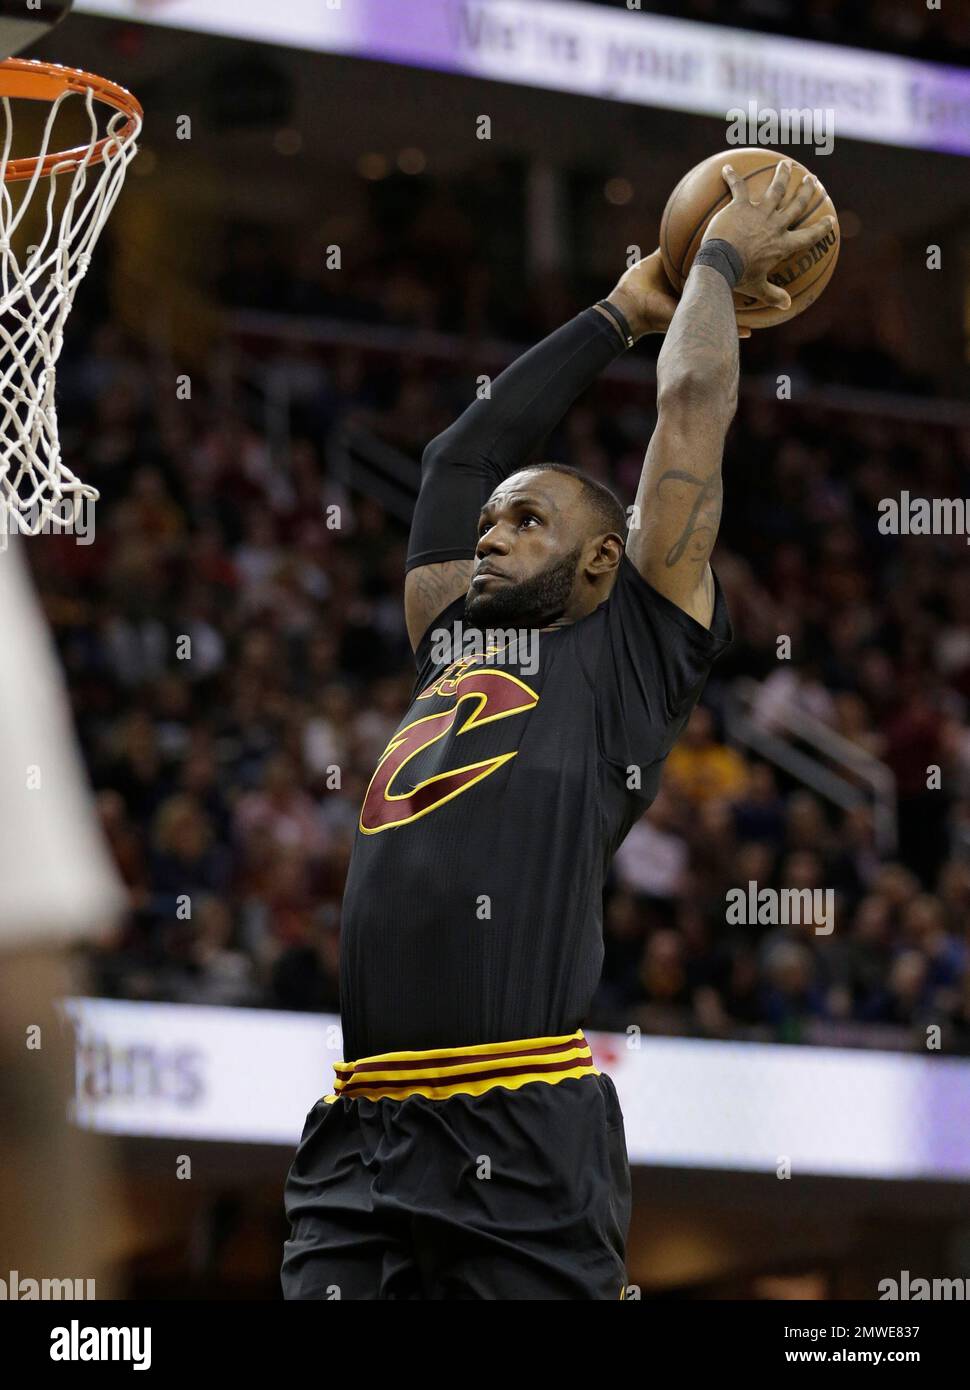 Cleveland Cavaliers' LeBron James dunks the ball against the Indiana Pacers  in the first half of an NBA basketball game, Wednesday, Feb. 15, 2017, in  Cleveland. (AP Photo/Tony Dejak Stock Photo - Alamy